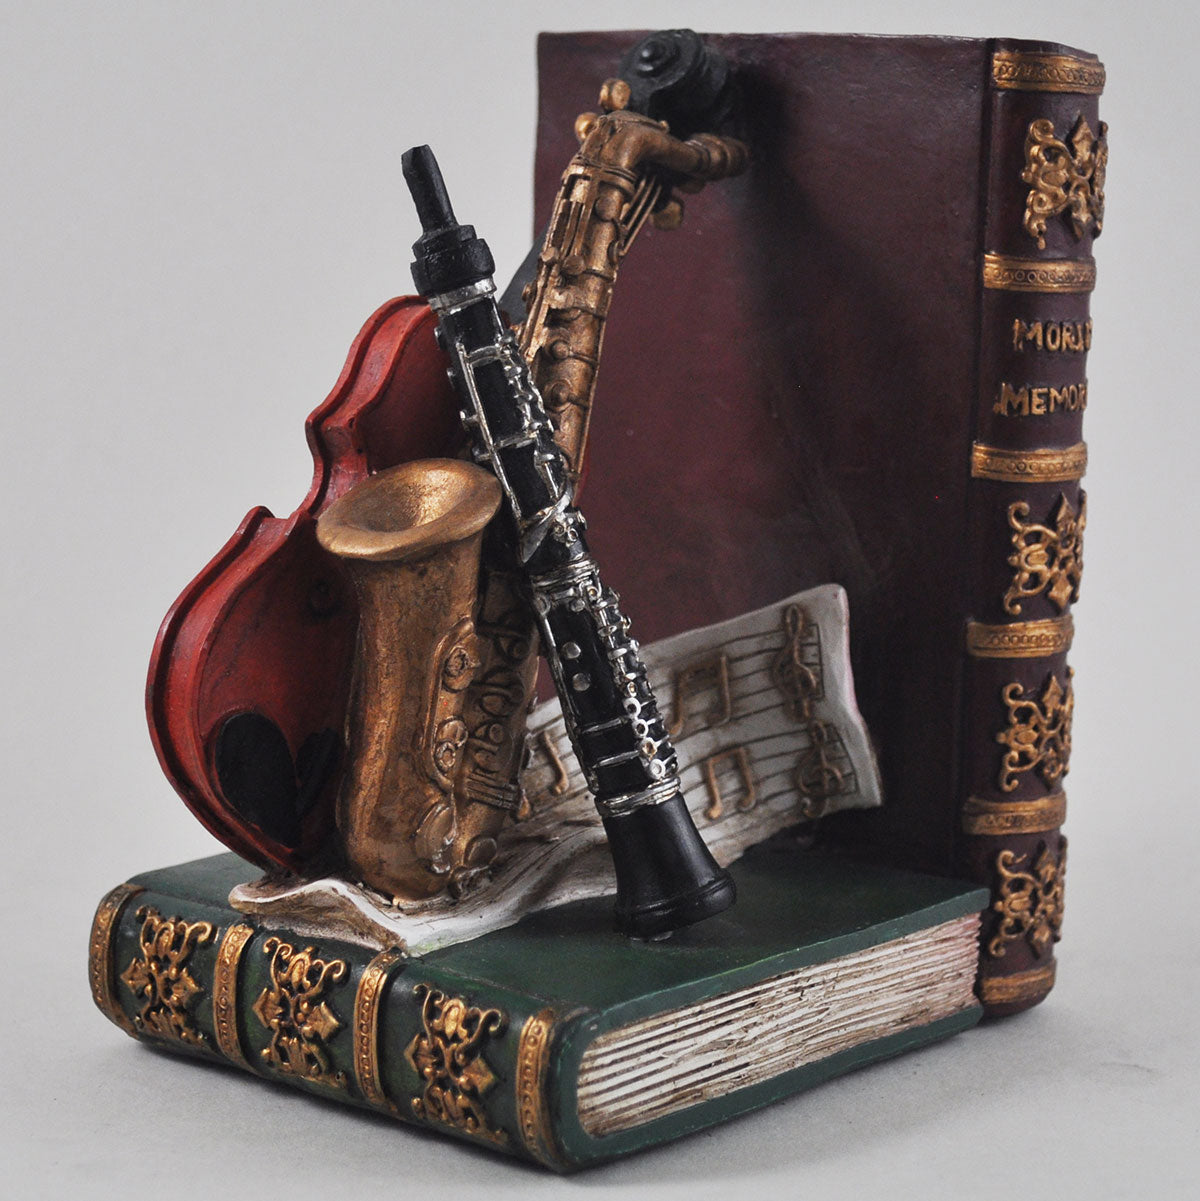 Musical Instrument Sheld Tidies - Bookends - TwoBeeps.co.uk